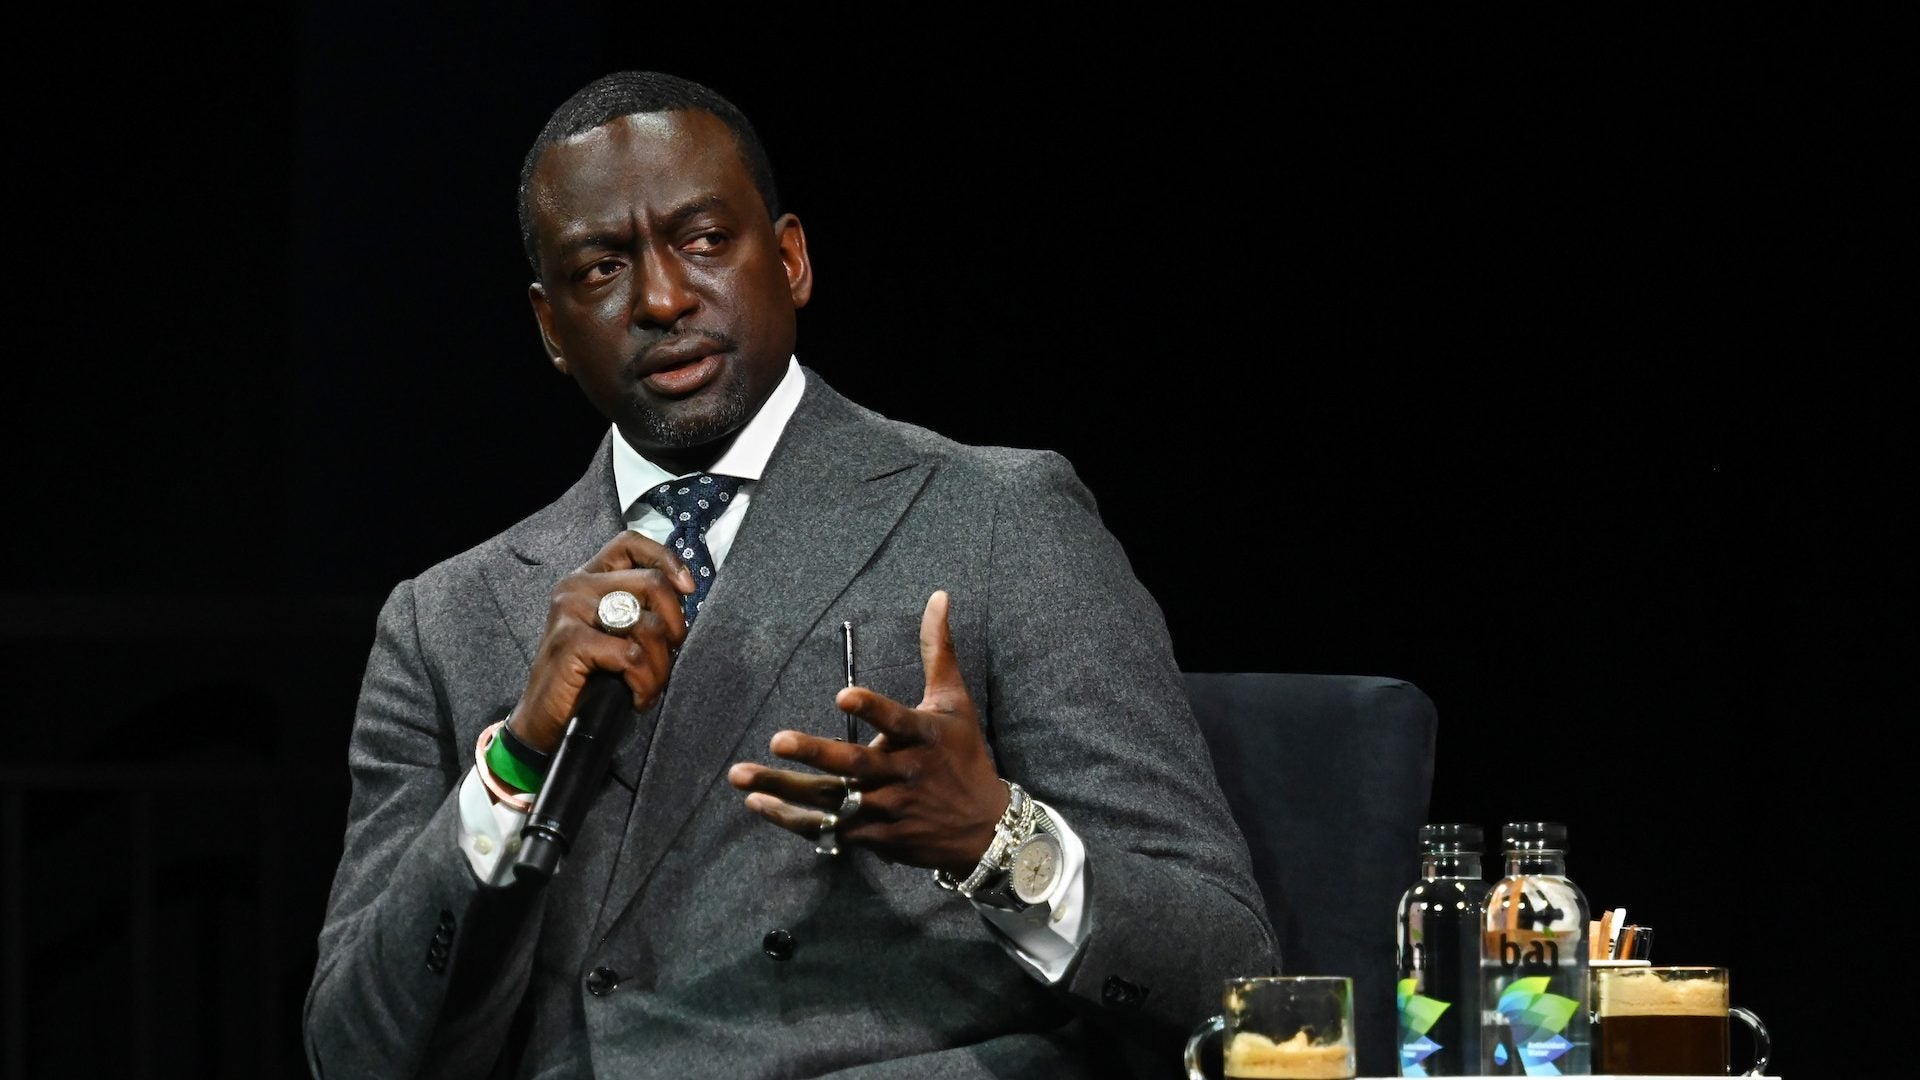 Yusef Salaam Pens Letter To Black Teens Struggling With What's Happening Right Now